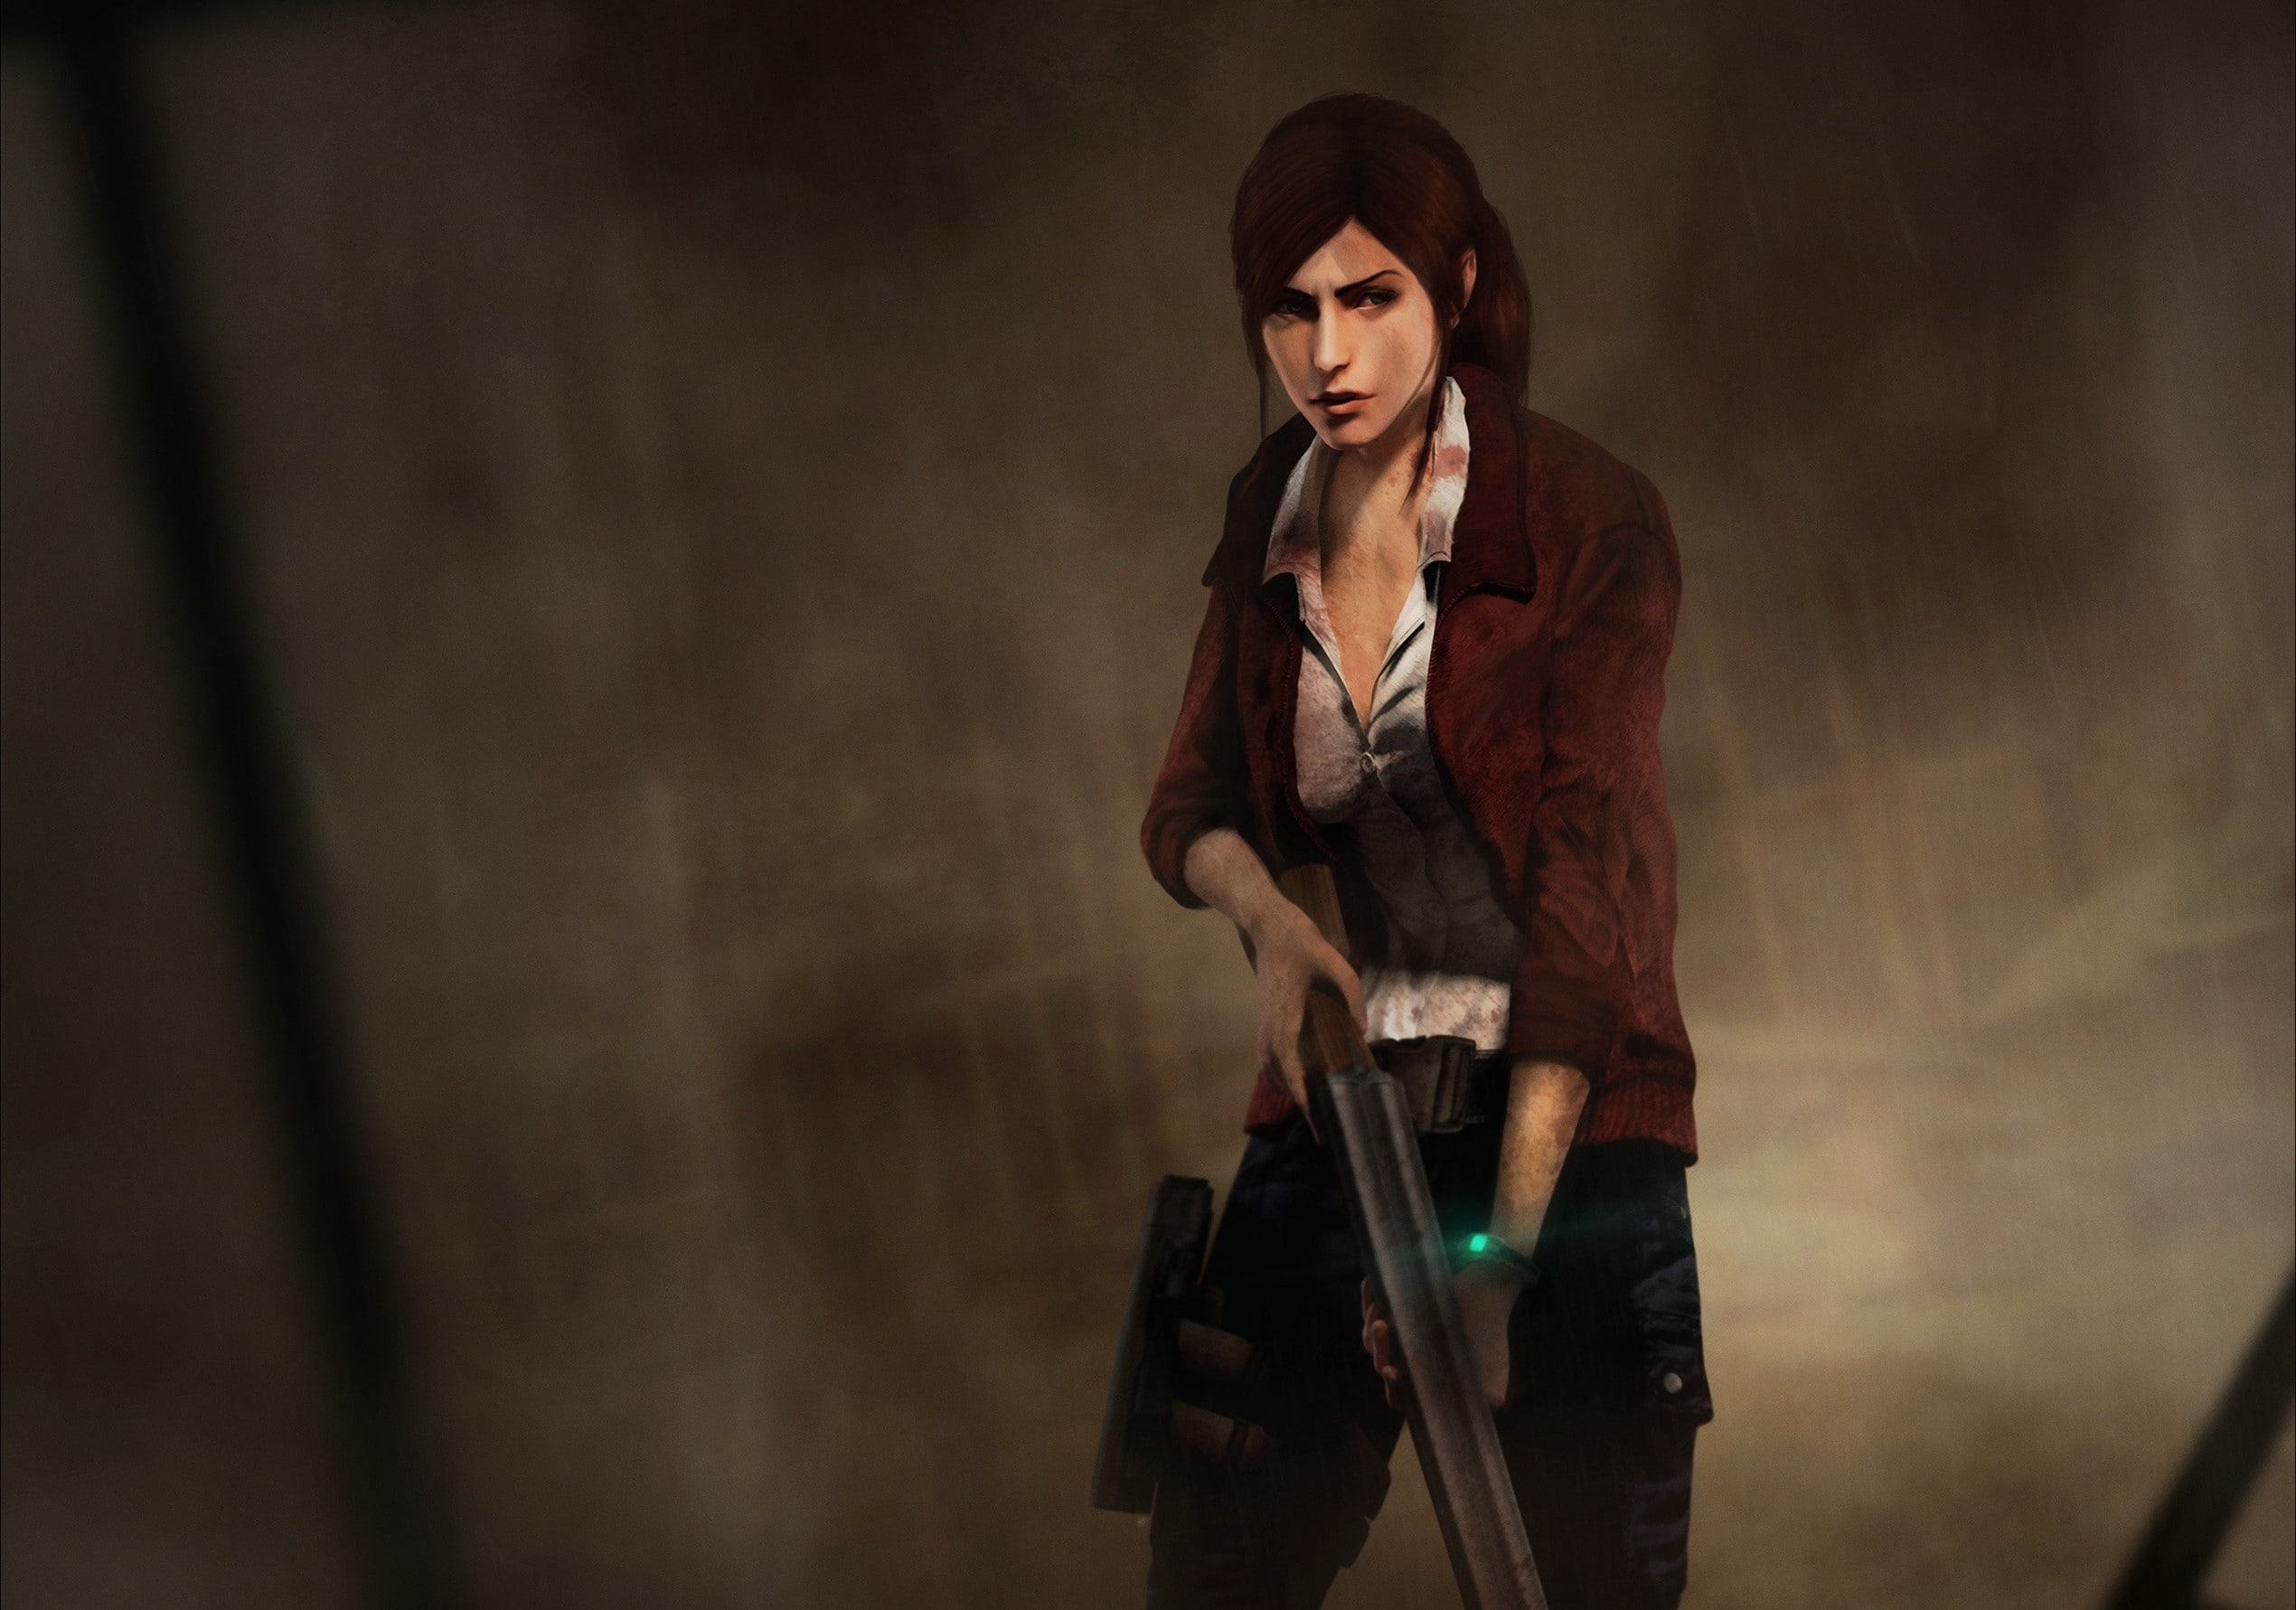 Resident evil, Revelations 2, Claire redfield, Girl, Weapons